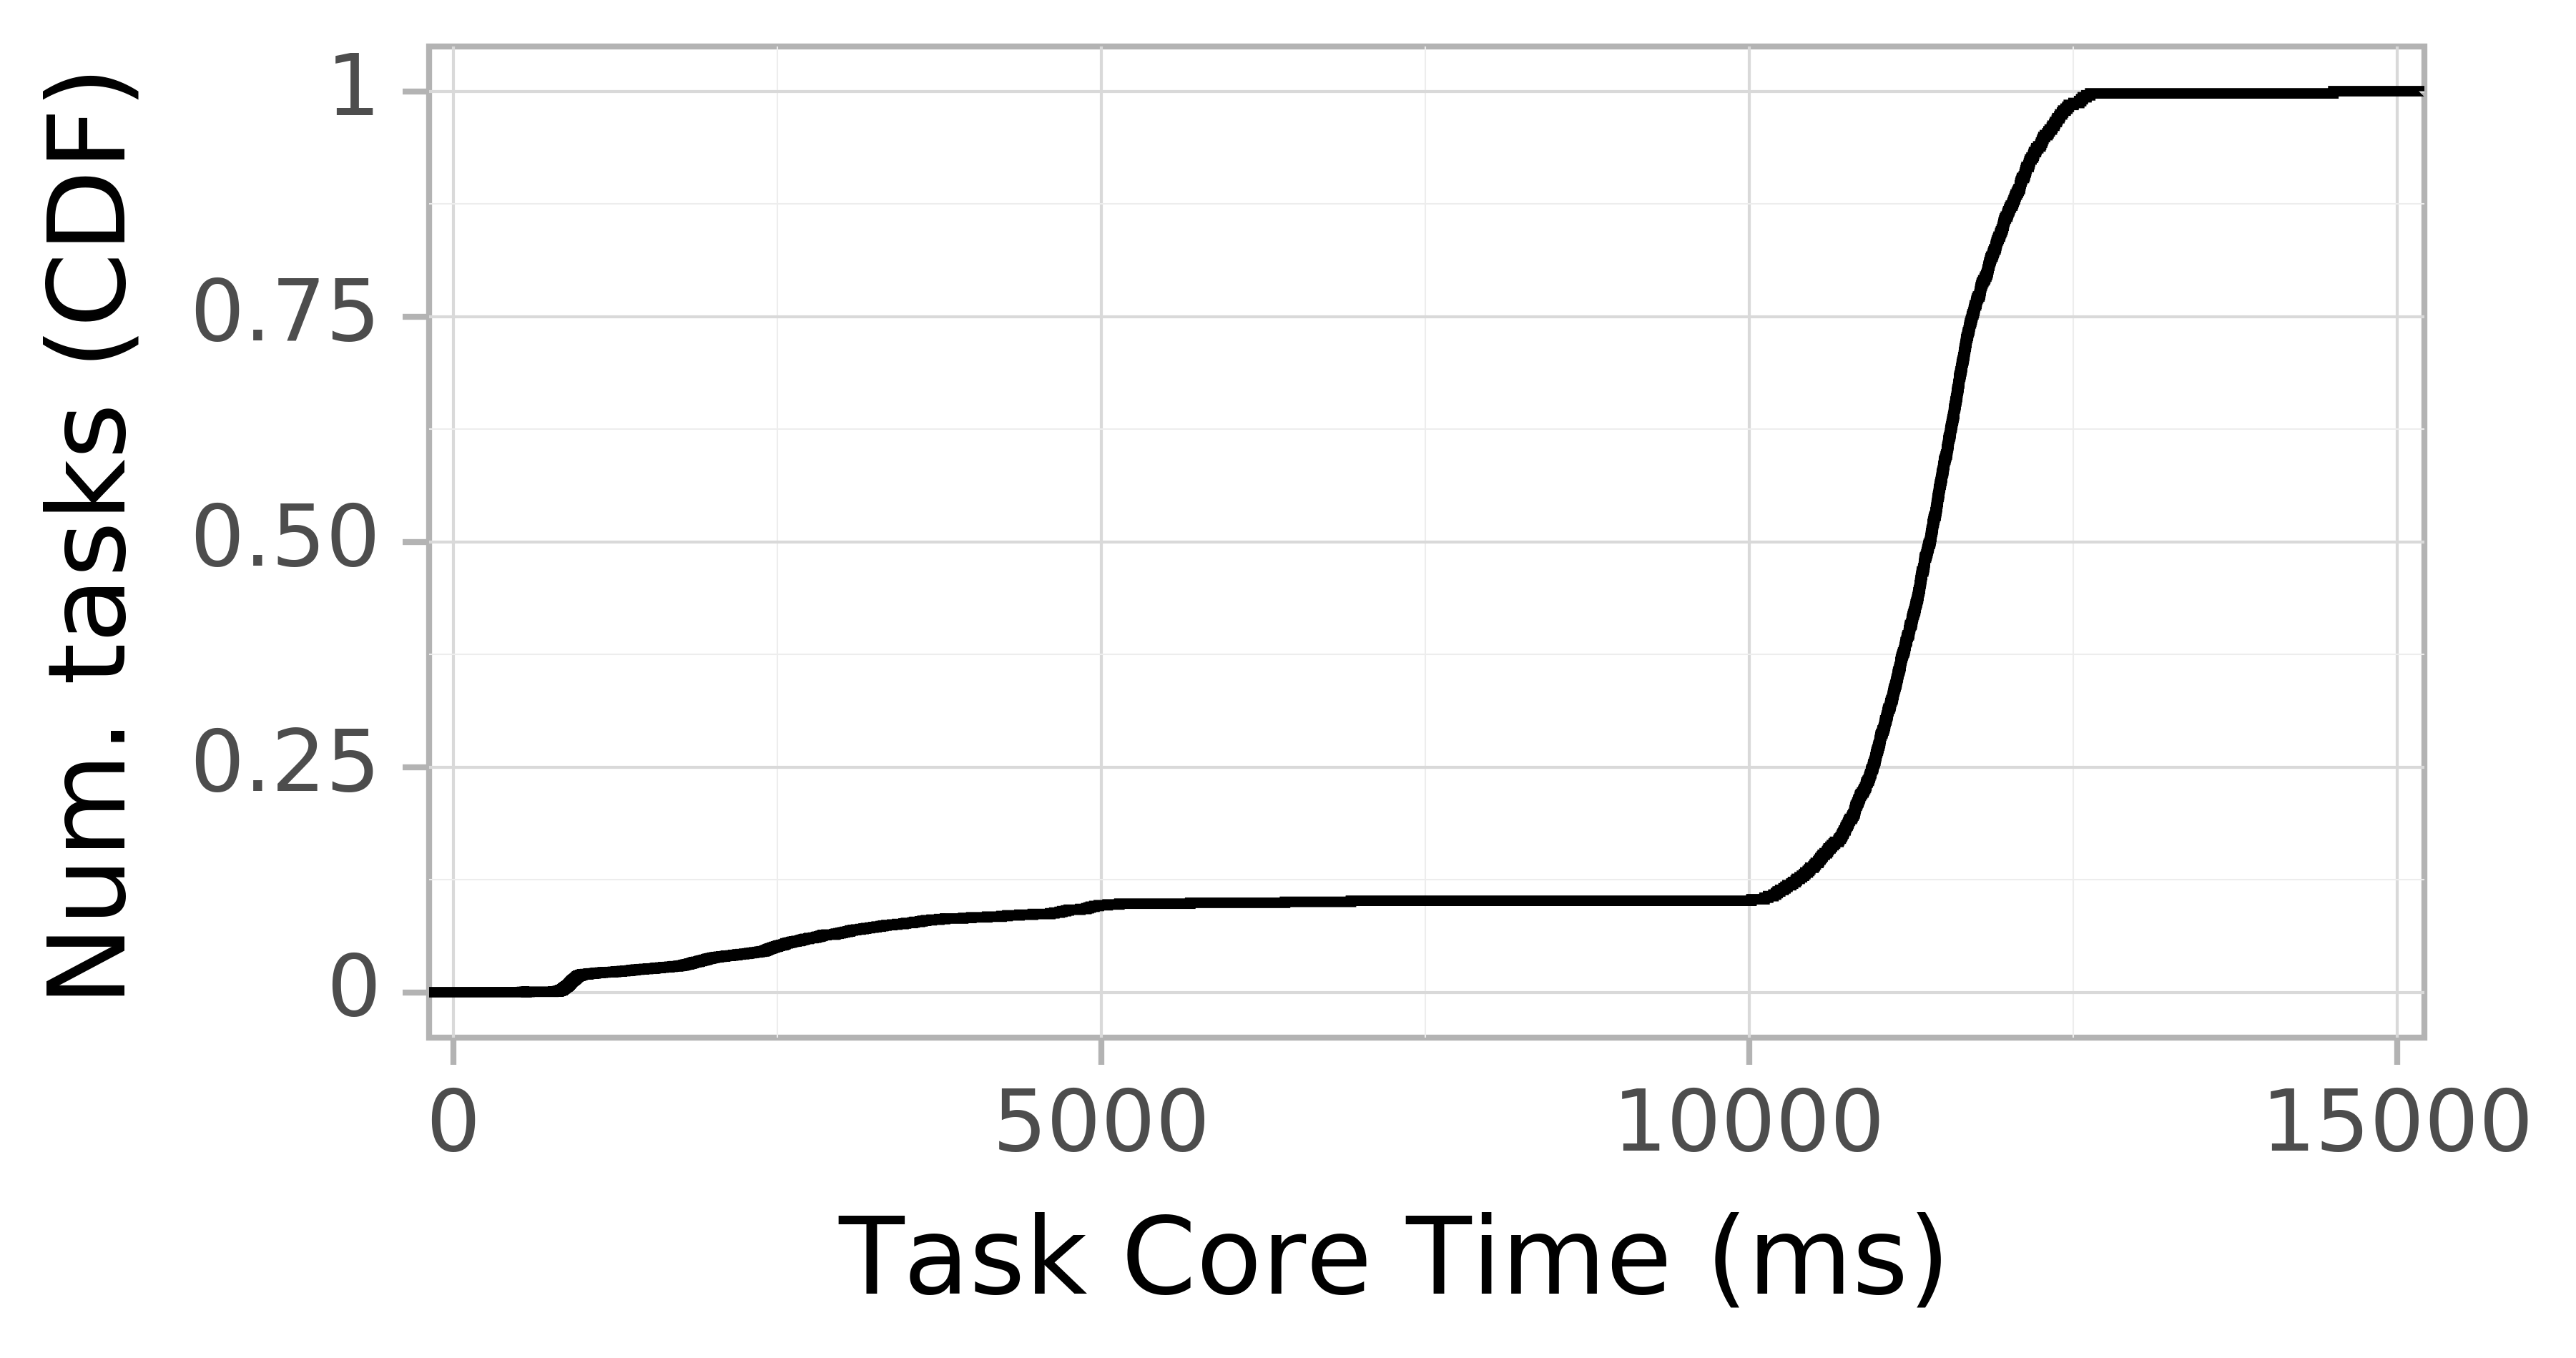 task resource time CDF graph for the askalon-new_ee54 trace.